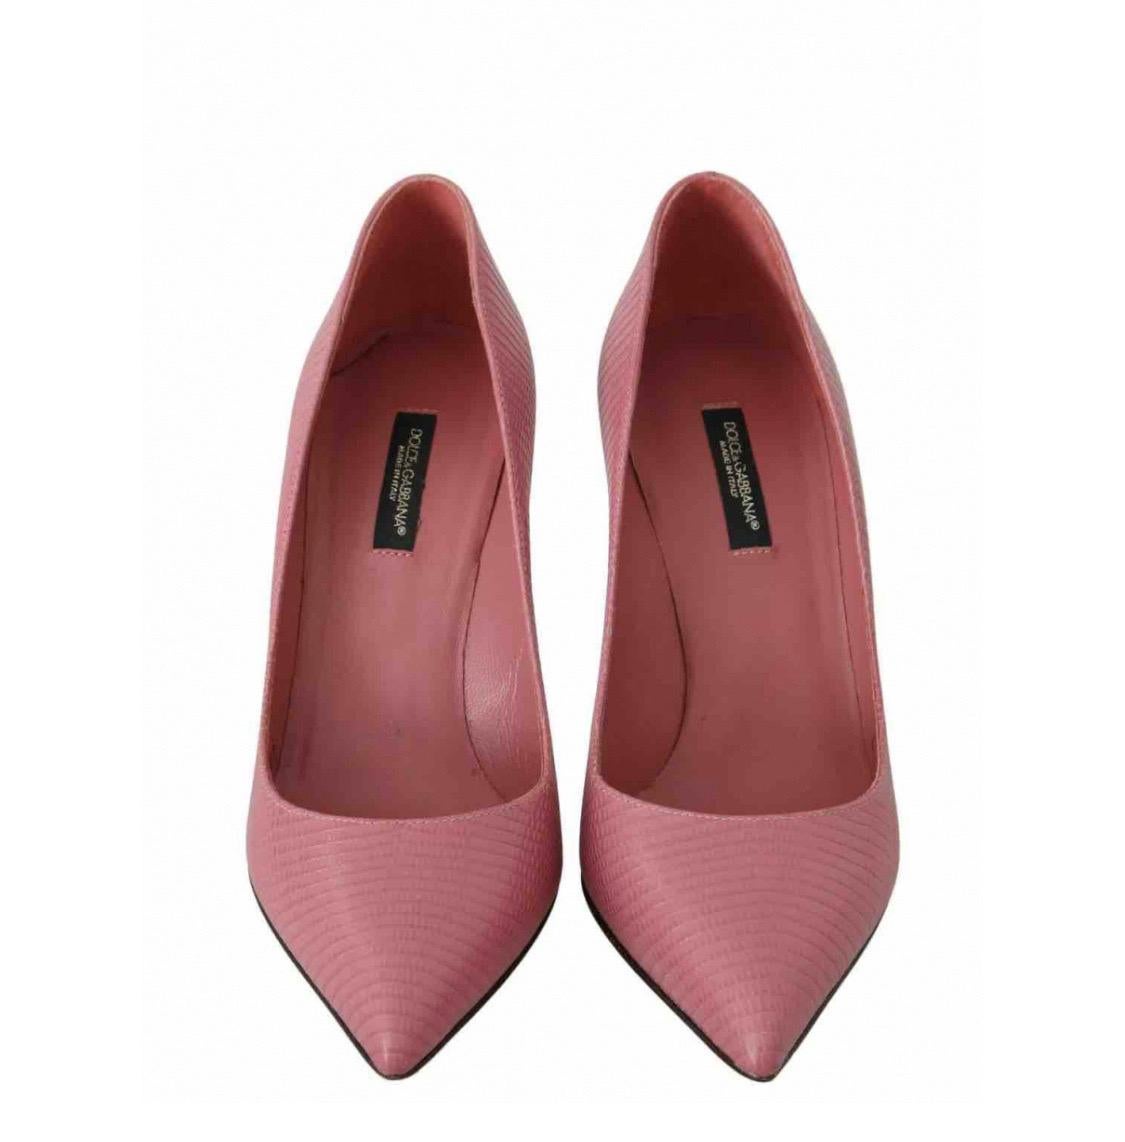 Dolce & Gabbana pink leather pointed toes heels pumps shoes In New Condition For Sale In WELWYN, GB